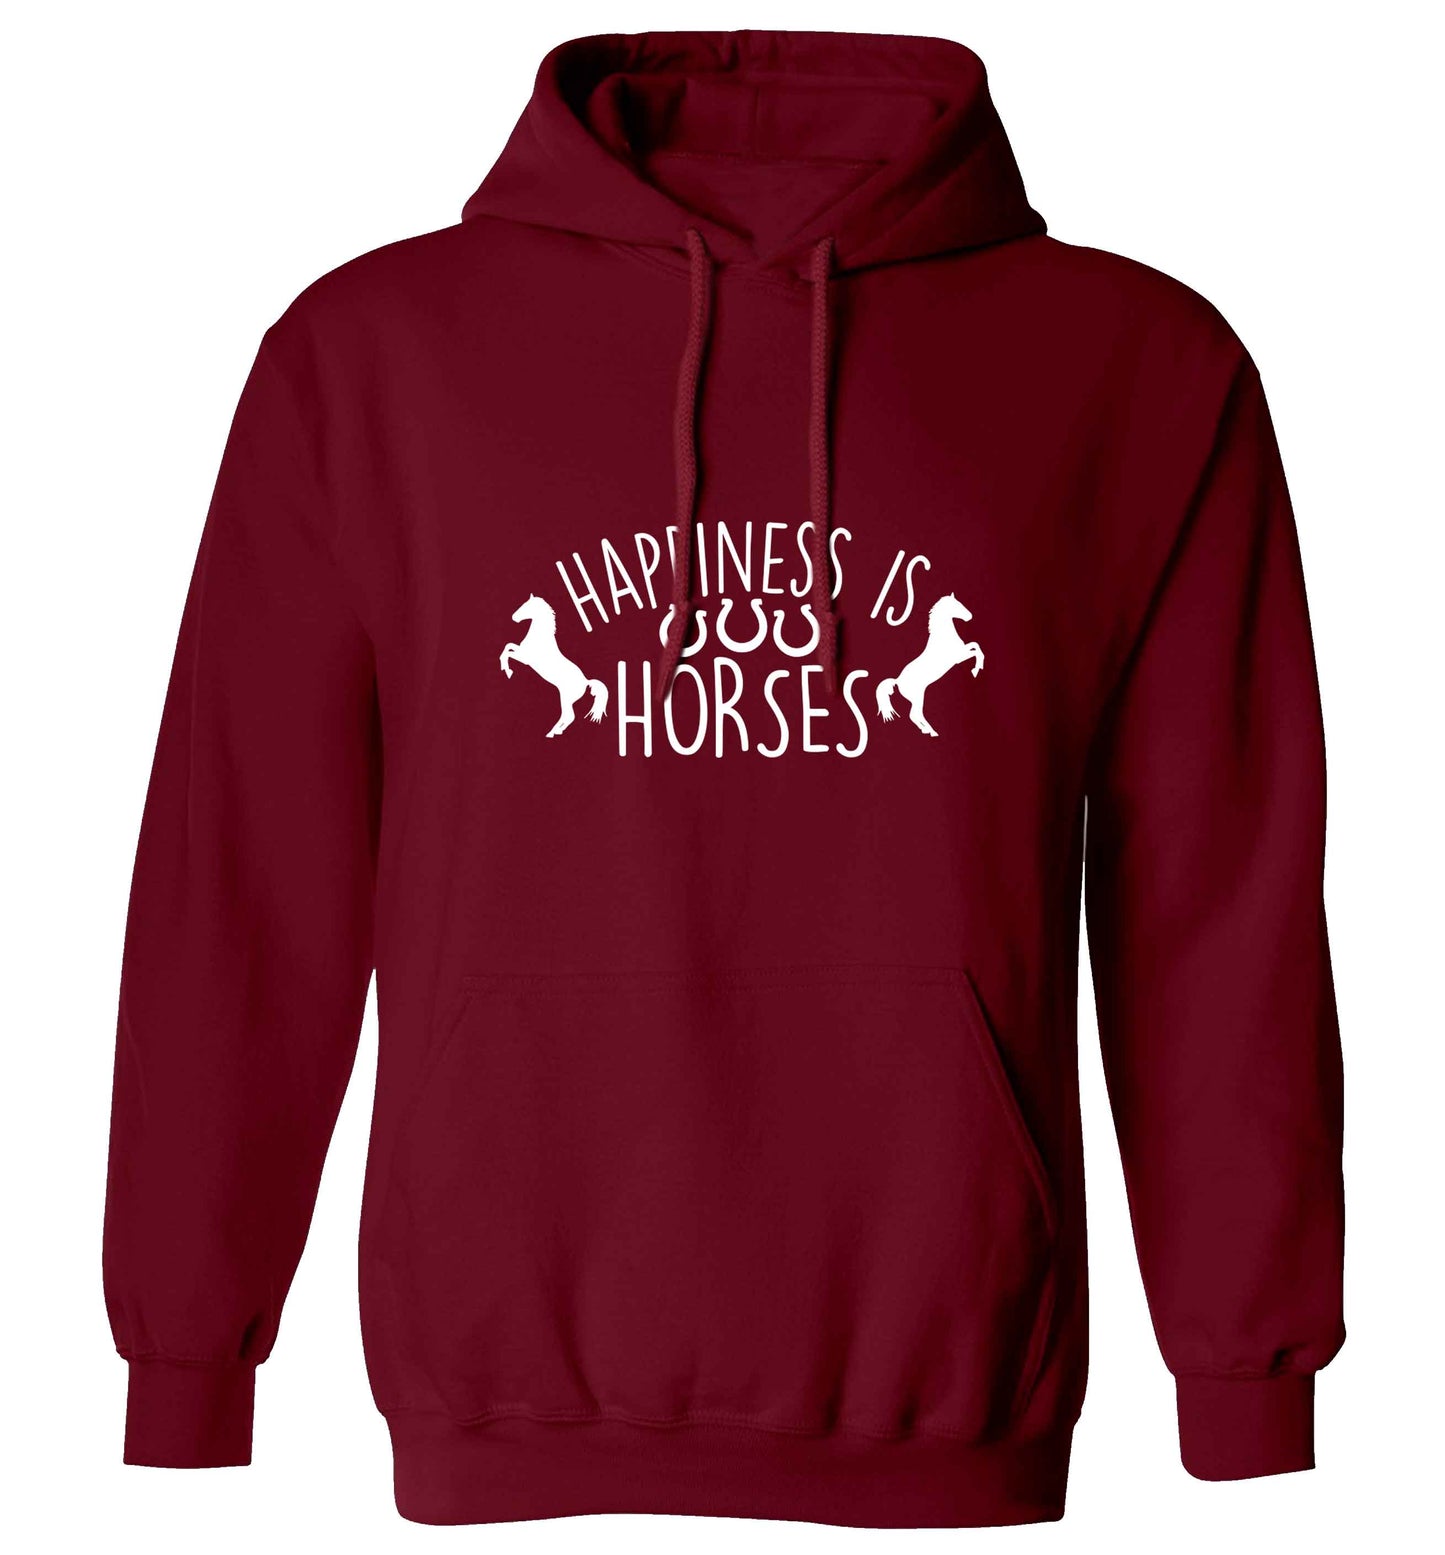 Happiness is horses adults unisex maroon hoodie 2XL